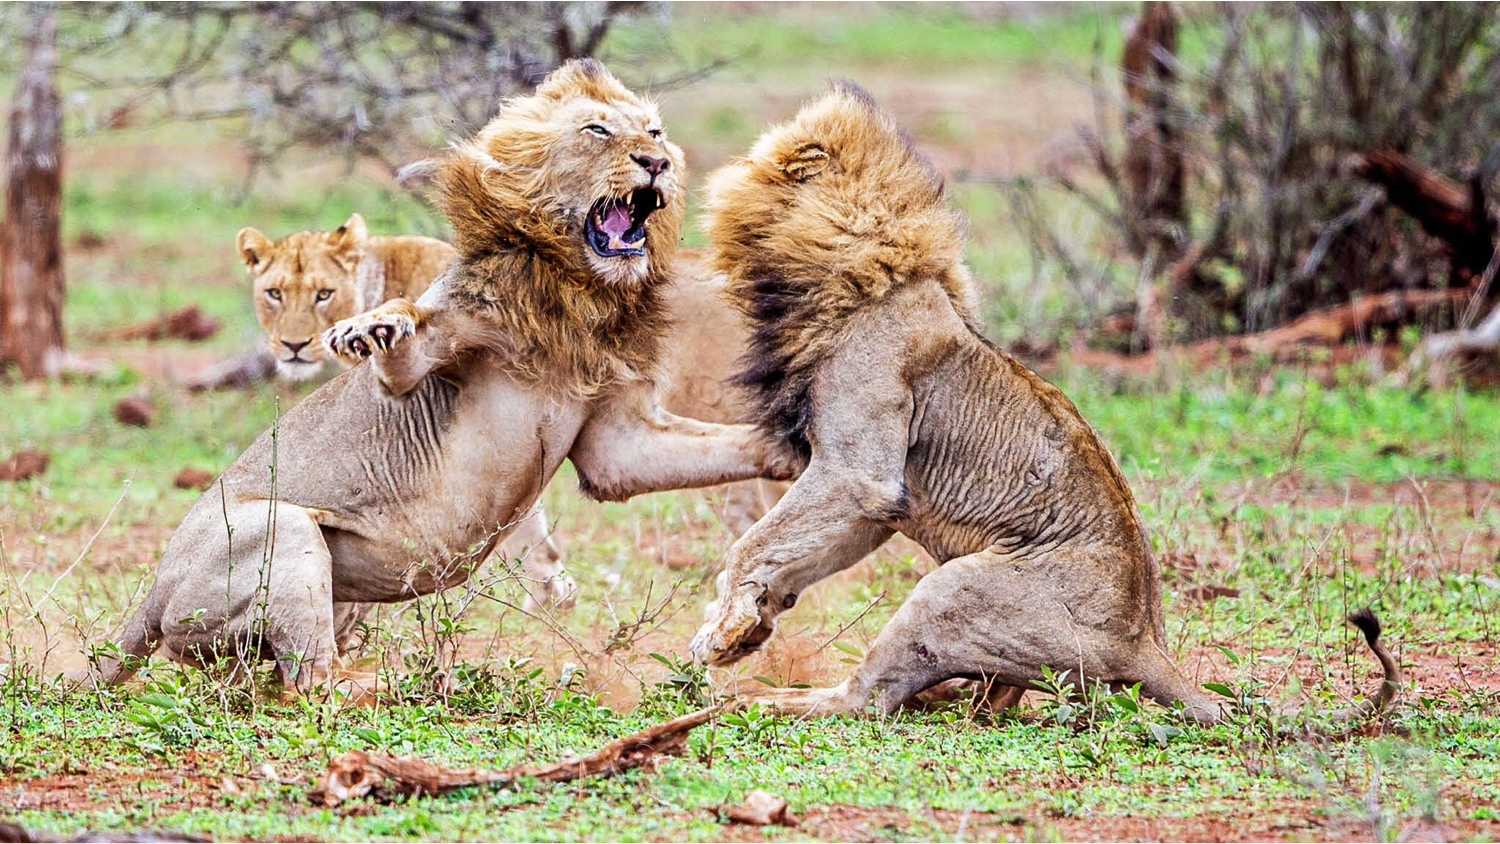 Lion fight  Get better at being challenged - 7 top tips lion fight